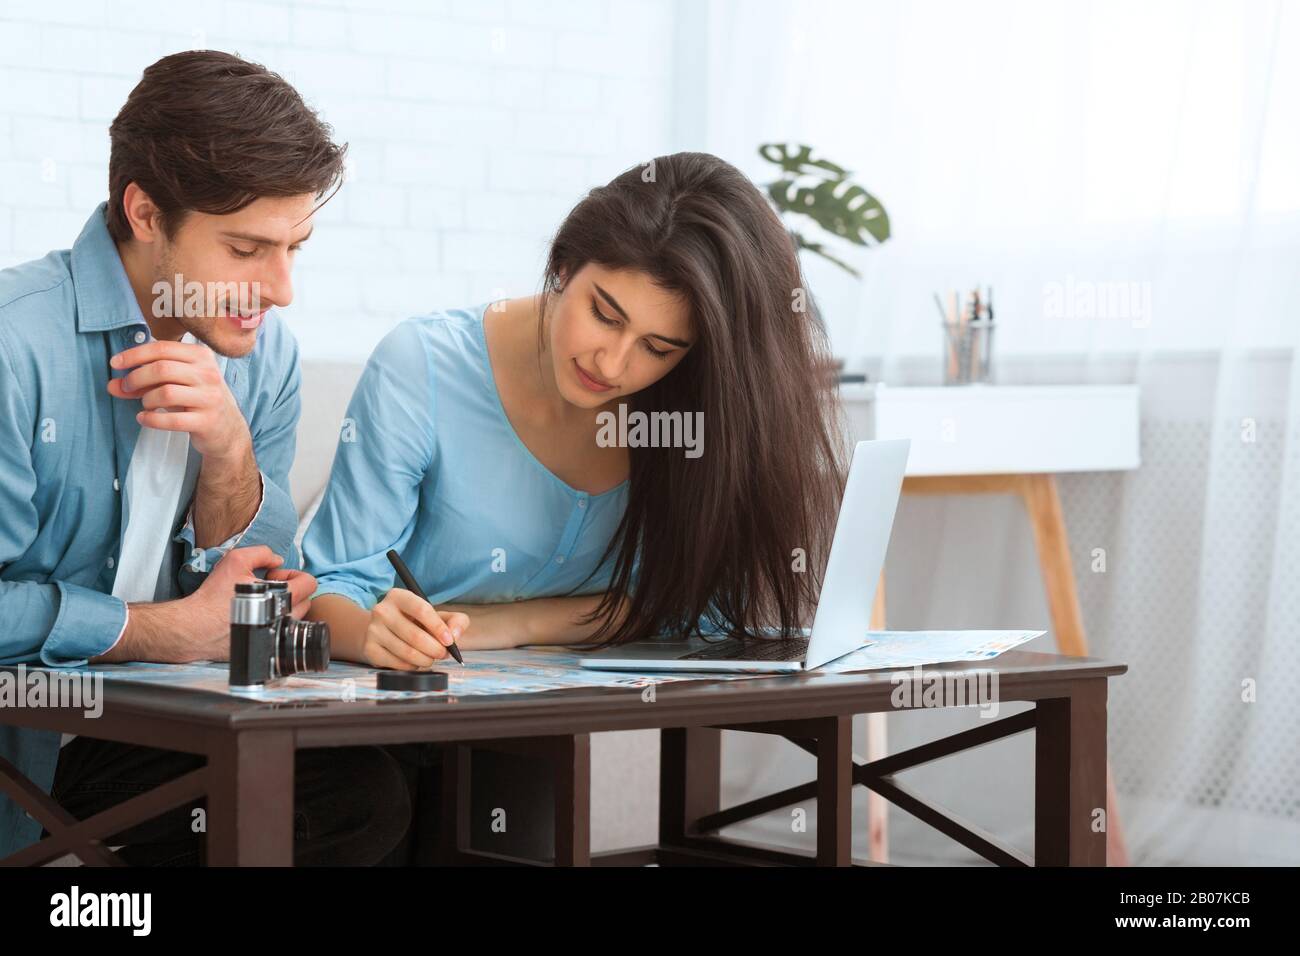 Planning trip. Young couple studying map and making notes Stock Photo